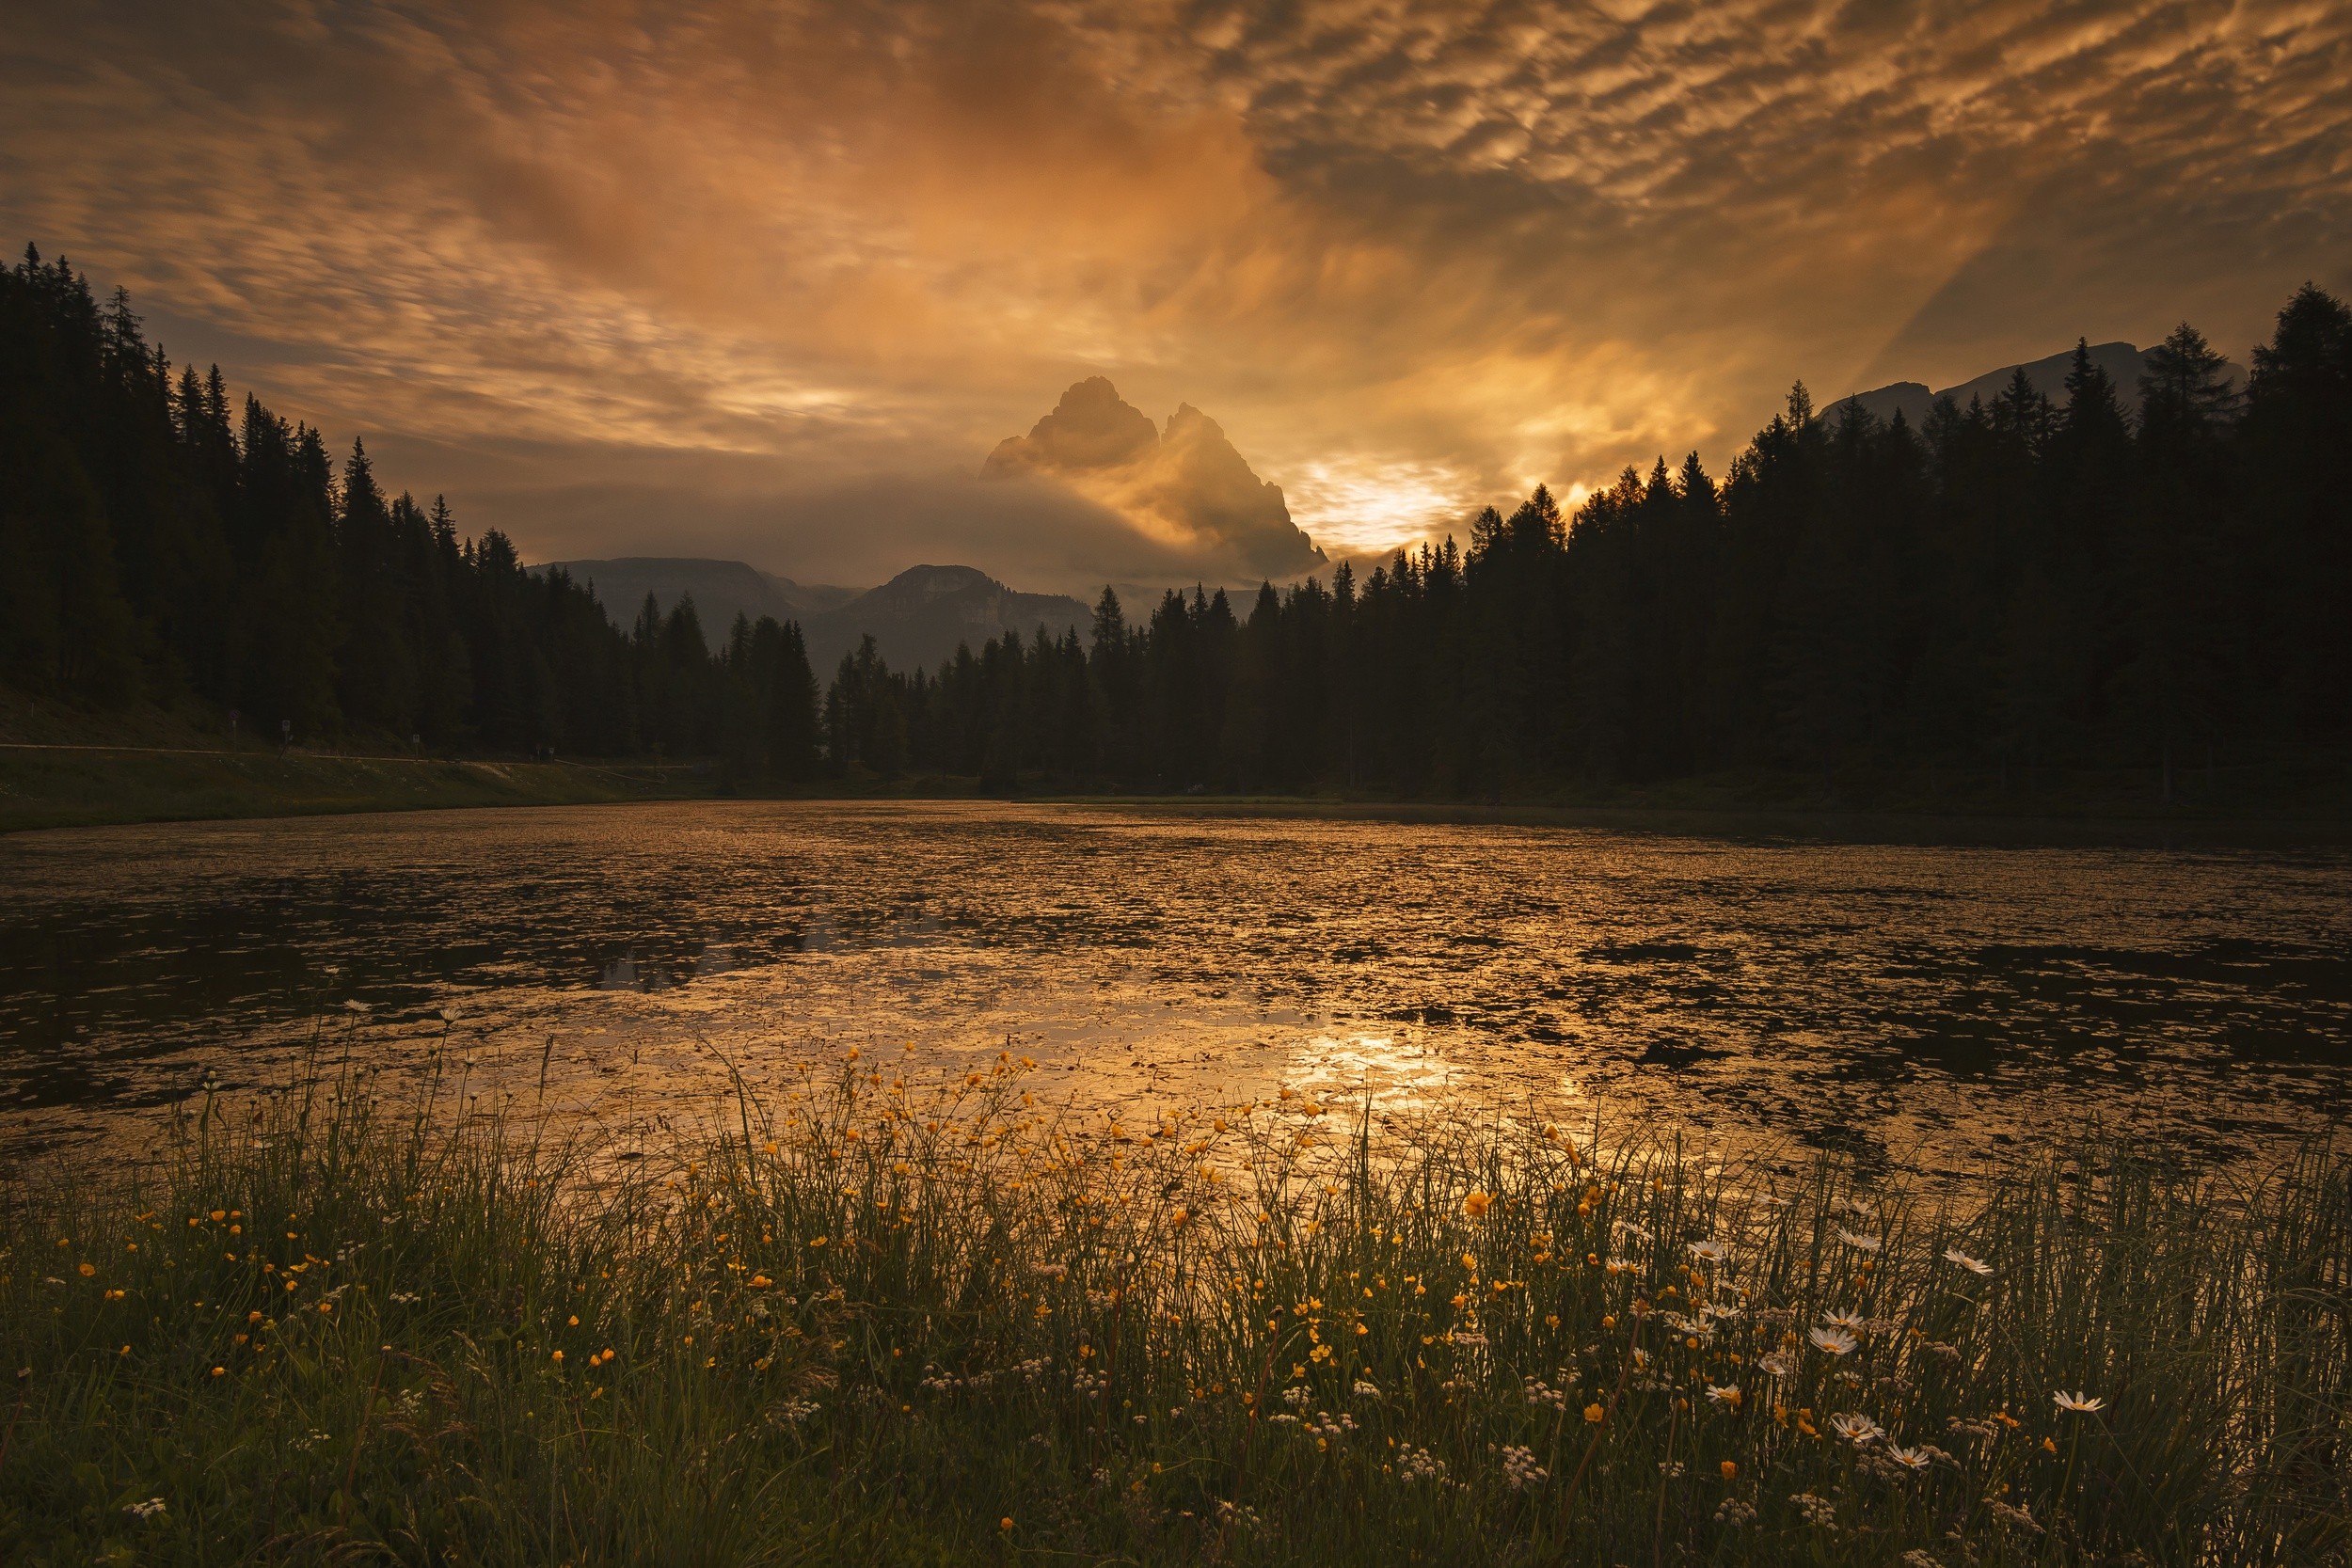 General 2500x1667 photography nature landscape morning sunlight sunrise wildflowers gold sky river mountains forest low light